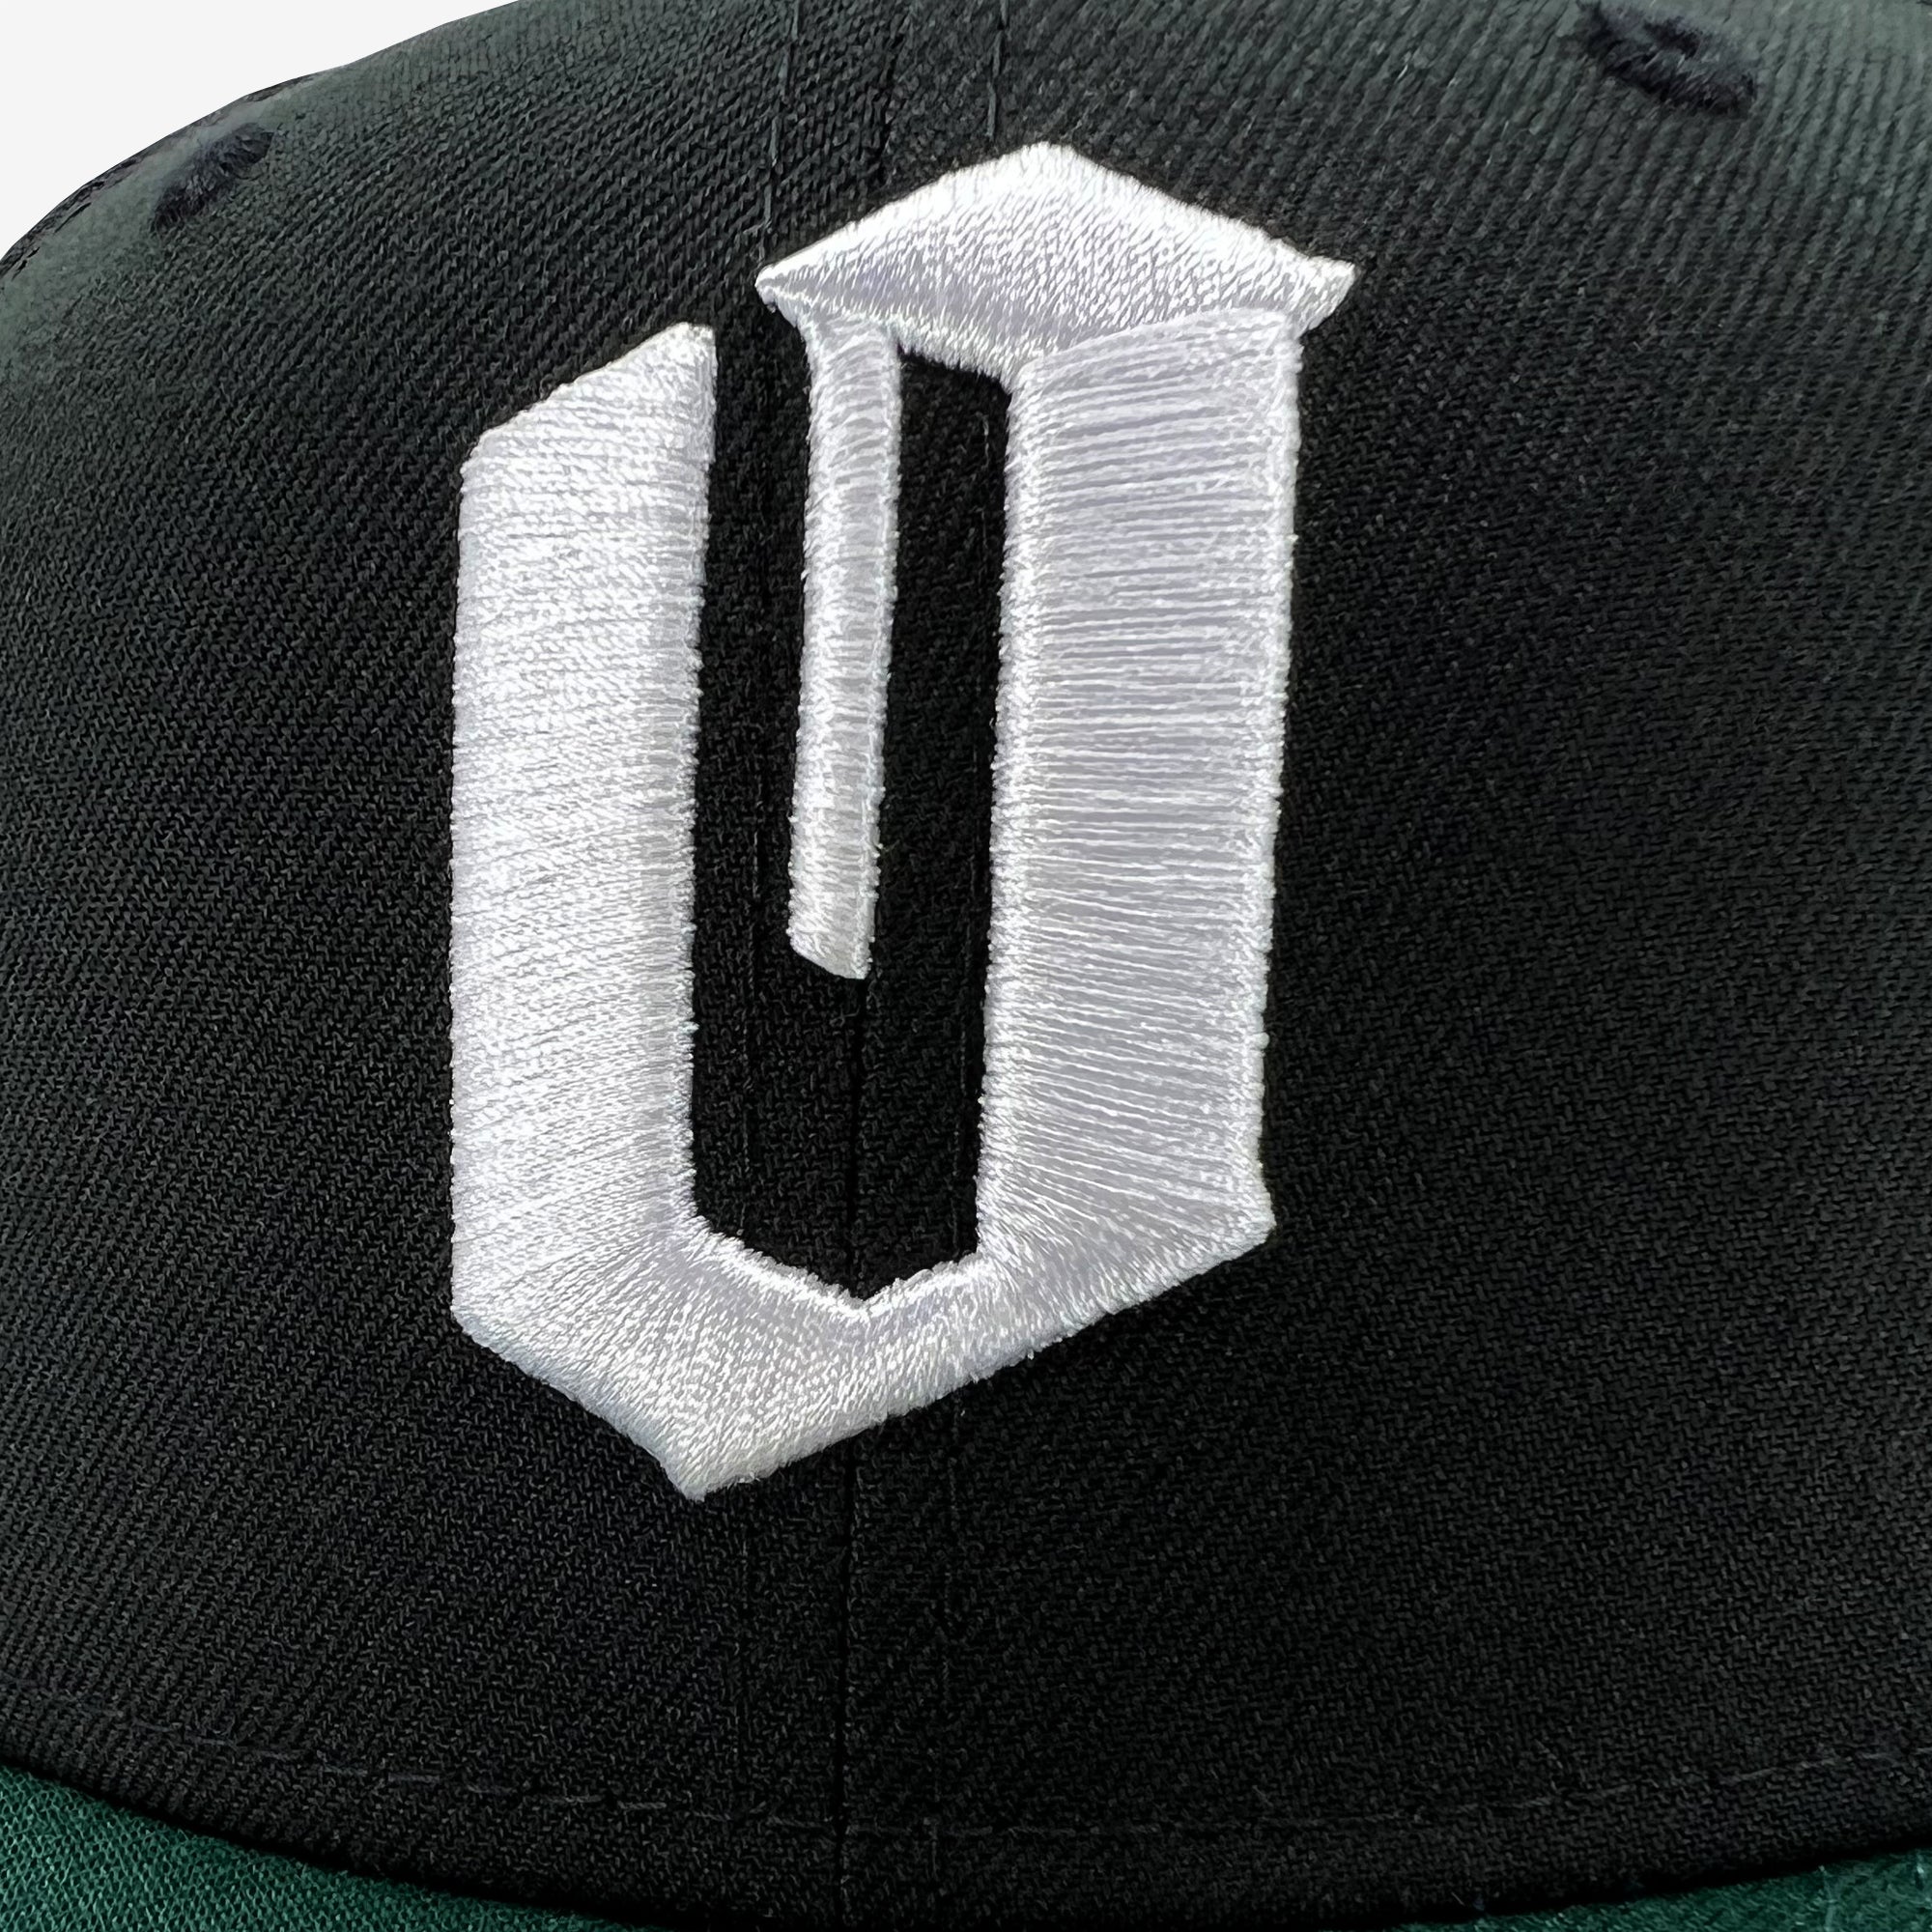 Close up of white embroidered O for Oakland on black New Era cap with green bill.